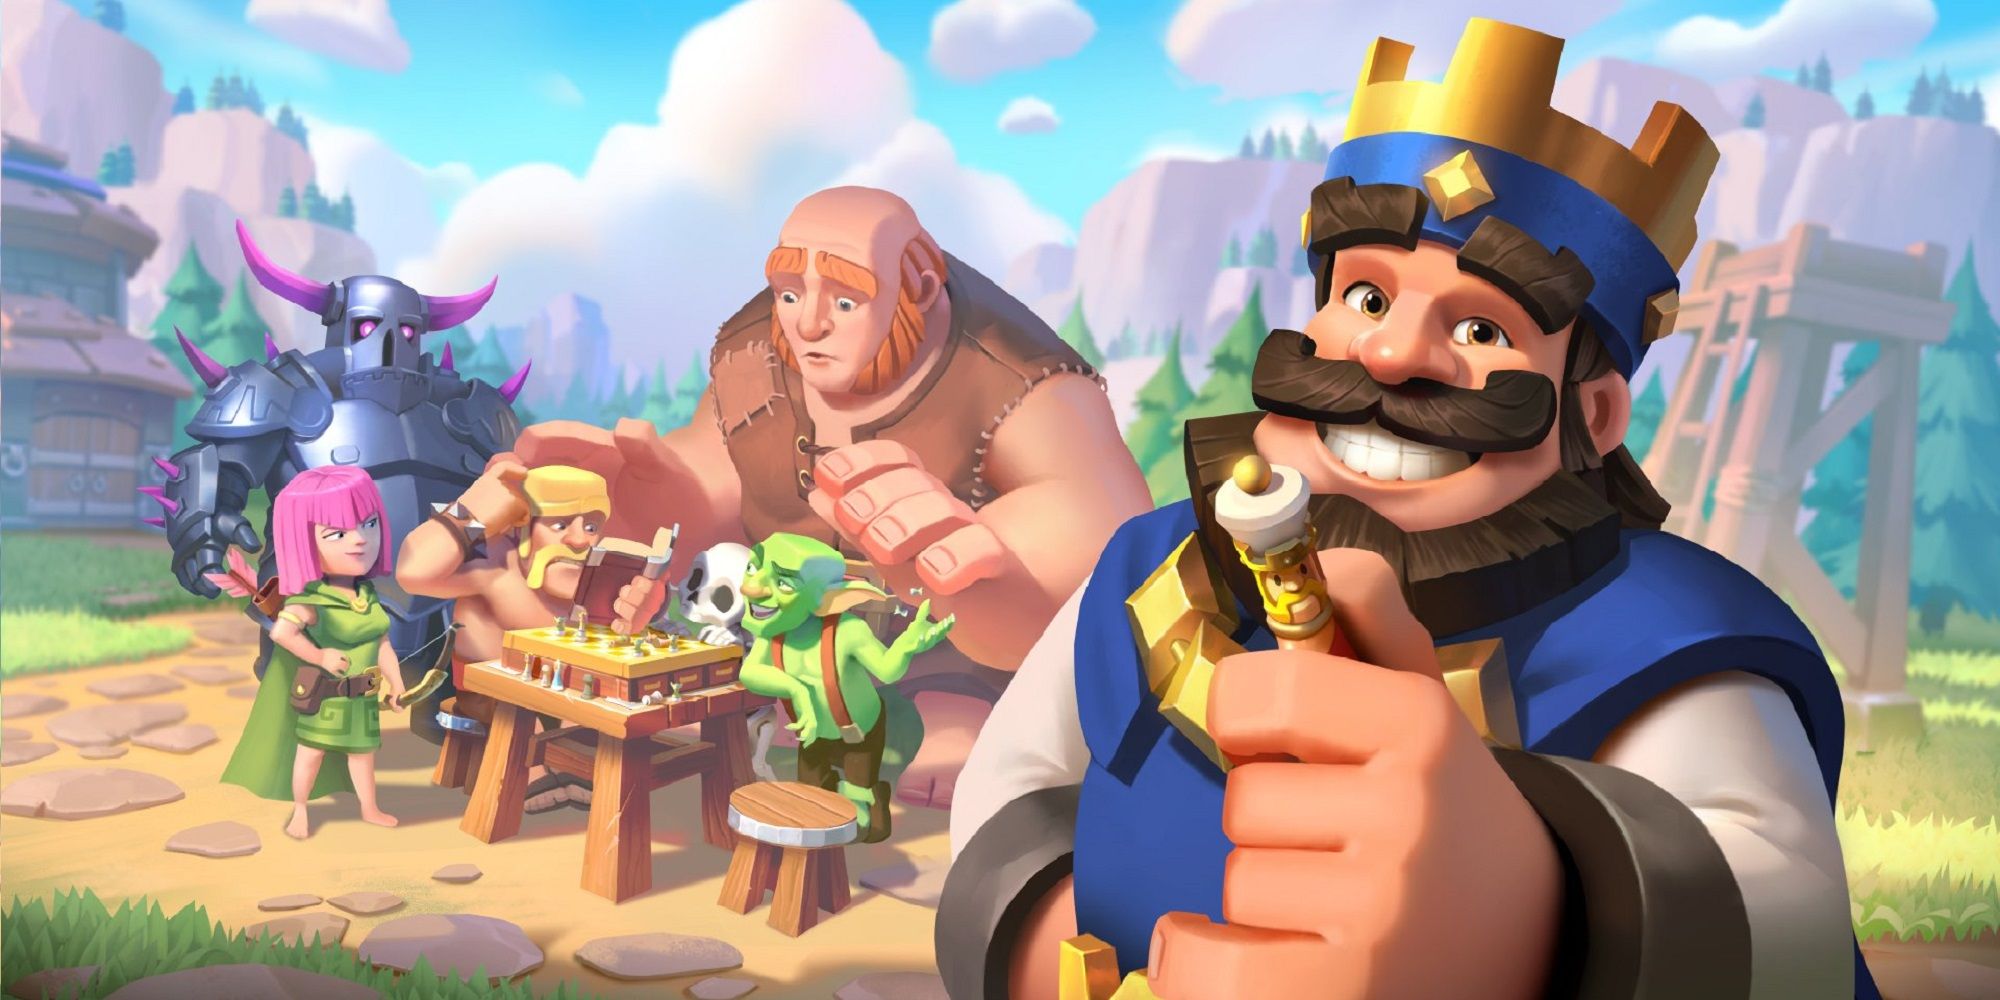 Google Play - Are you ready to raid? 💪 Play against your favorite Clash of  Clans and Clash Royale characters during an epic round of chess on  Chess.com — Checkmate your best